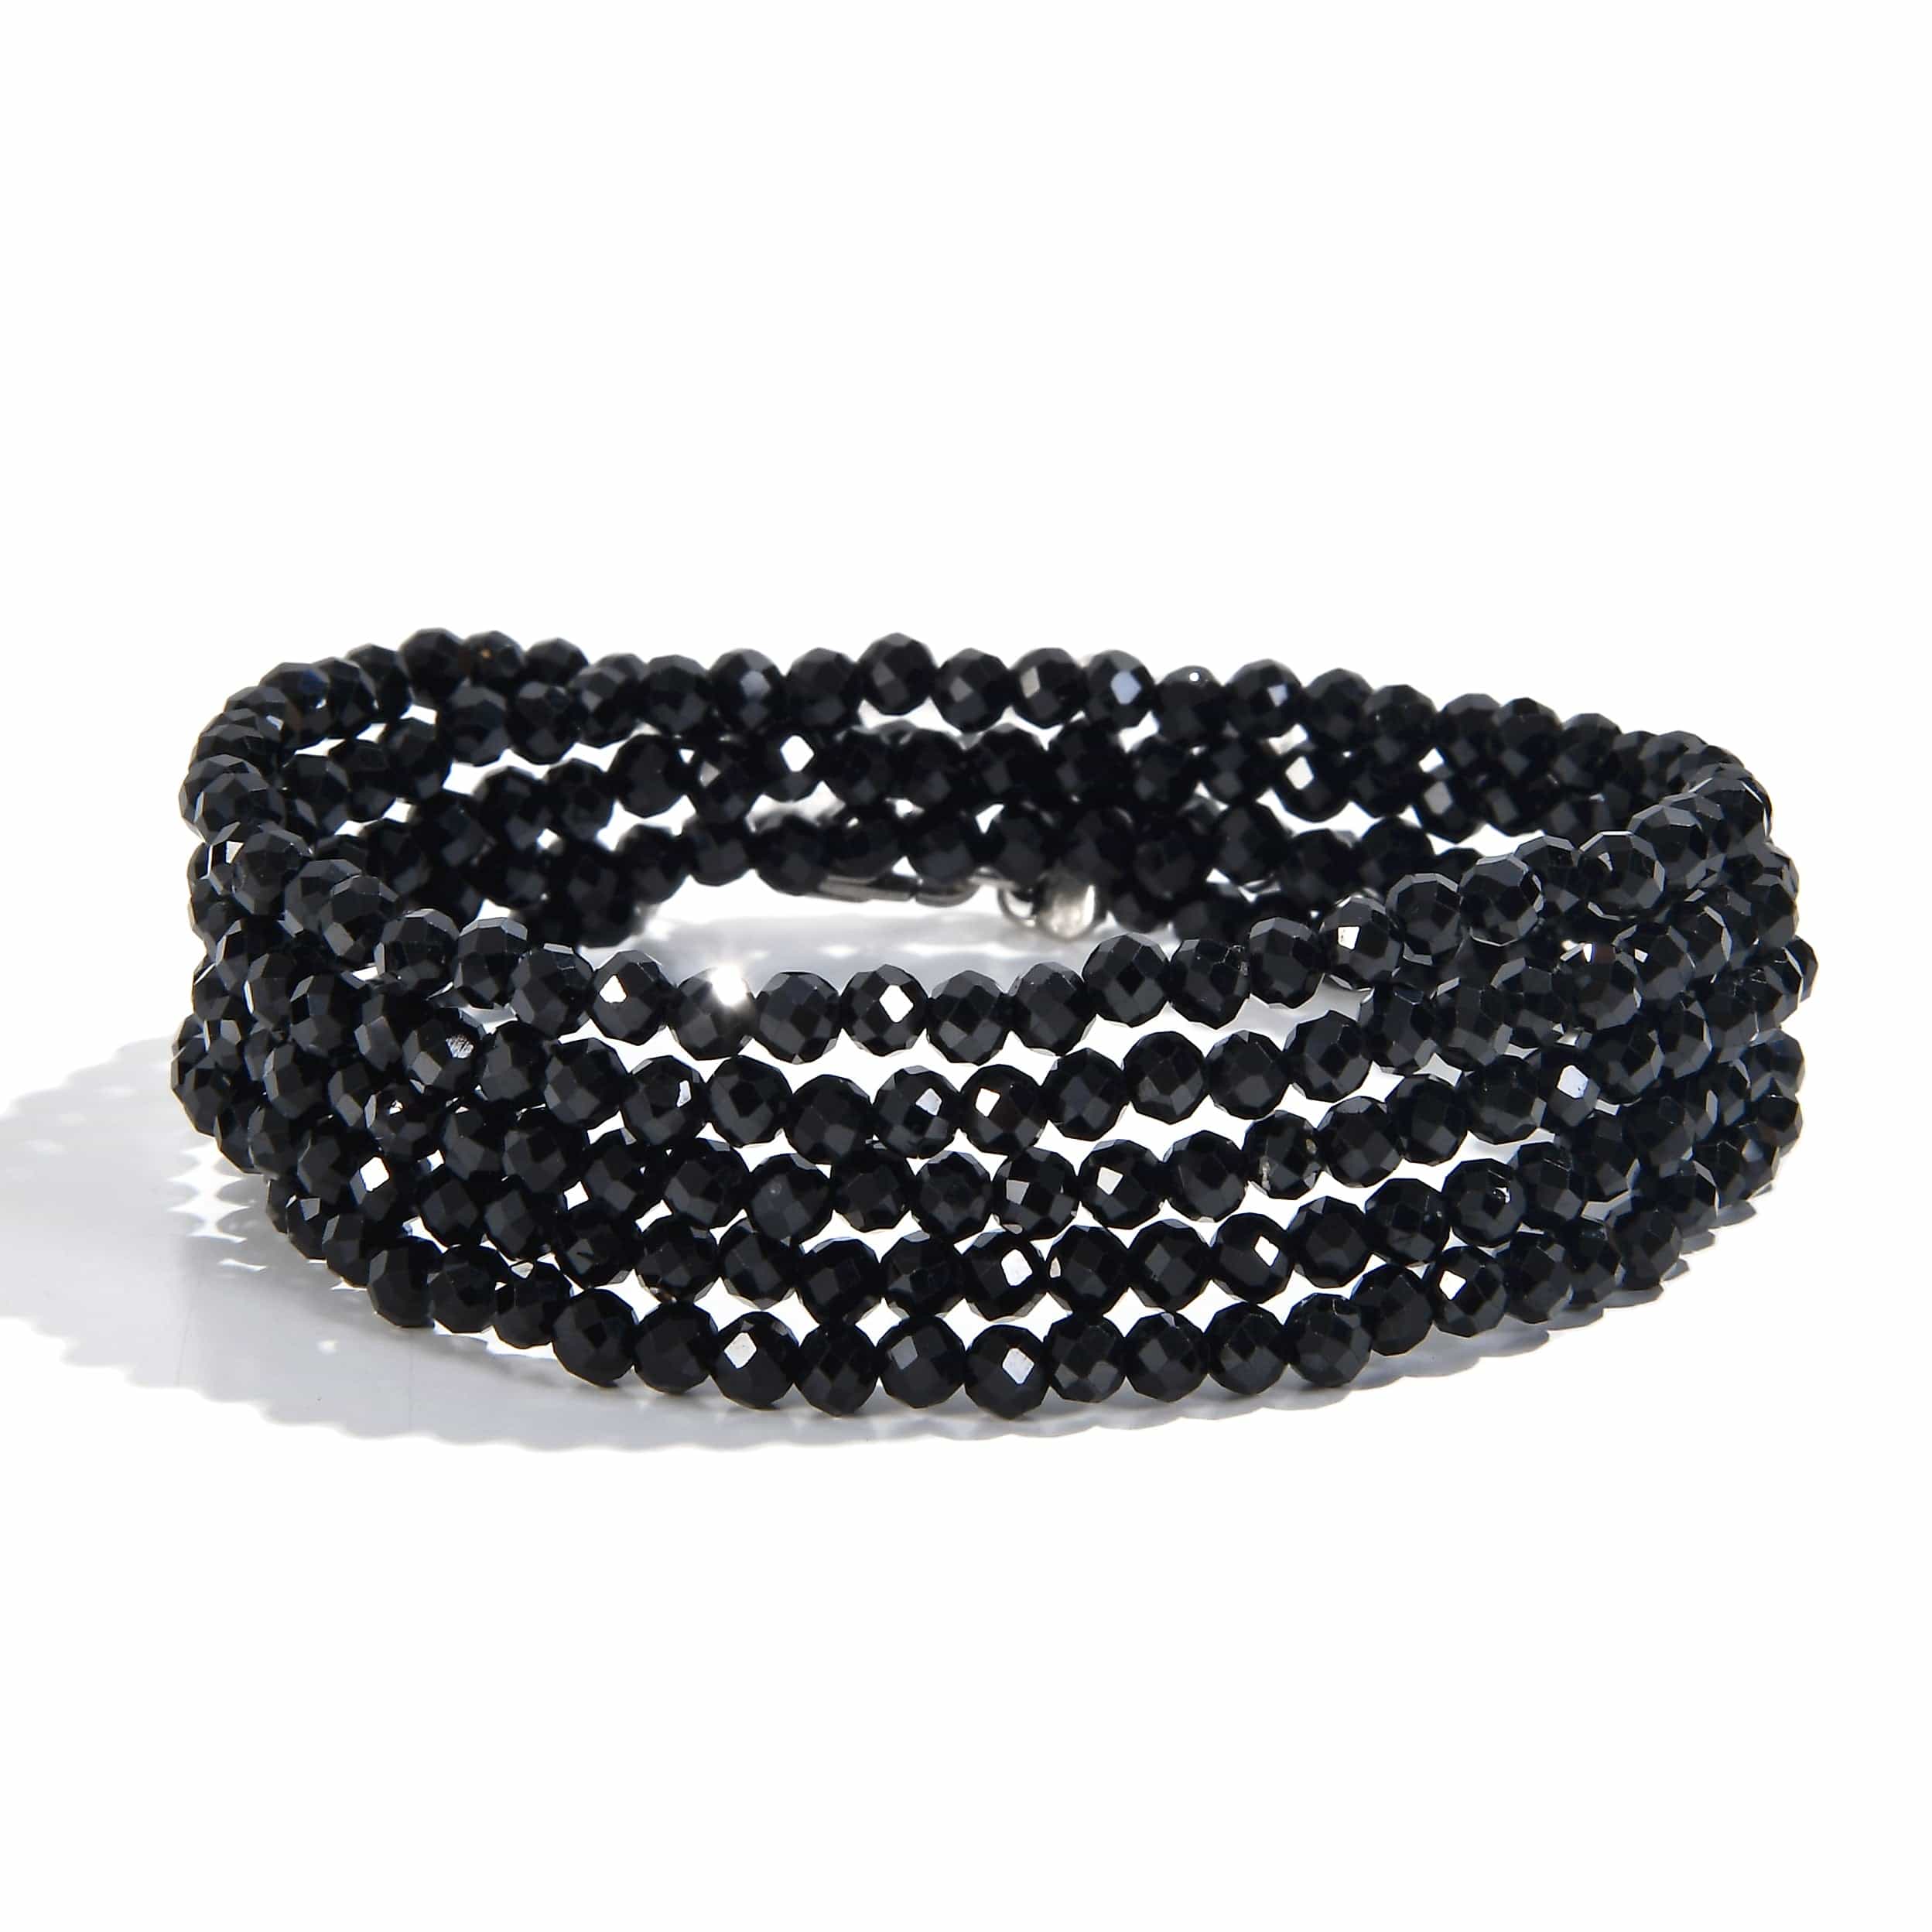 KALIFANO Gemstone Jewelry 3mm Black Spinal Faceted 31" Necklace / Multi Wrap Bracelet N3-79S-BS